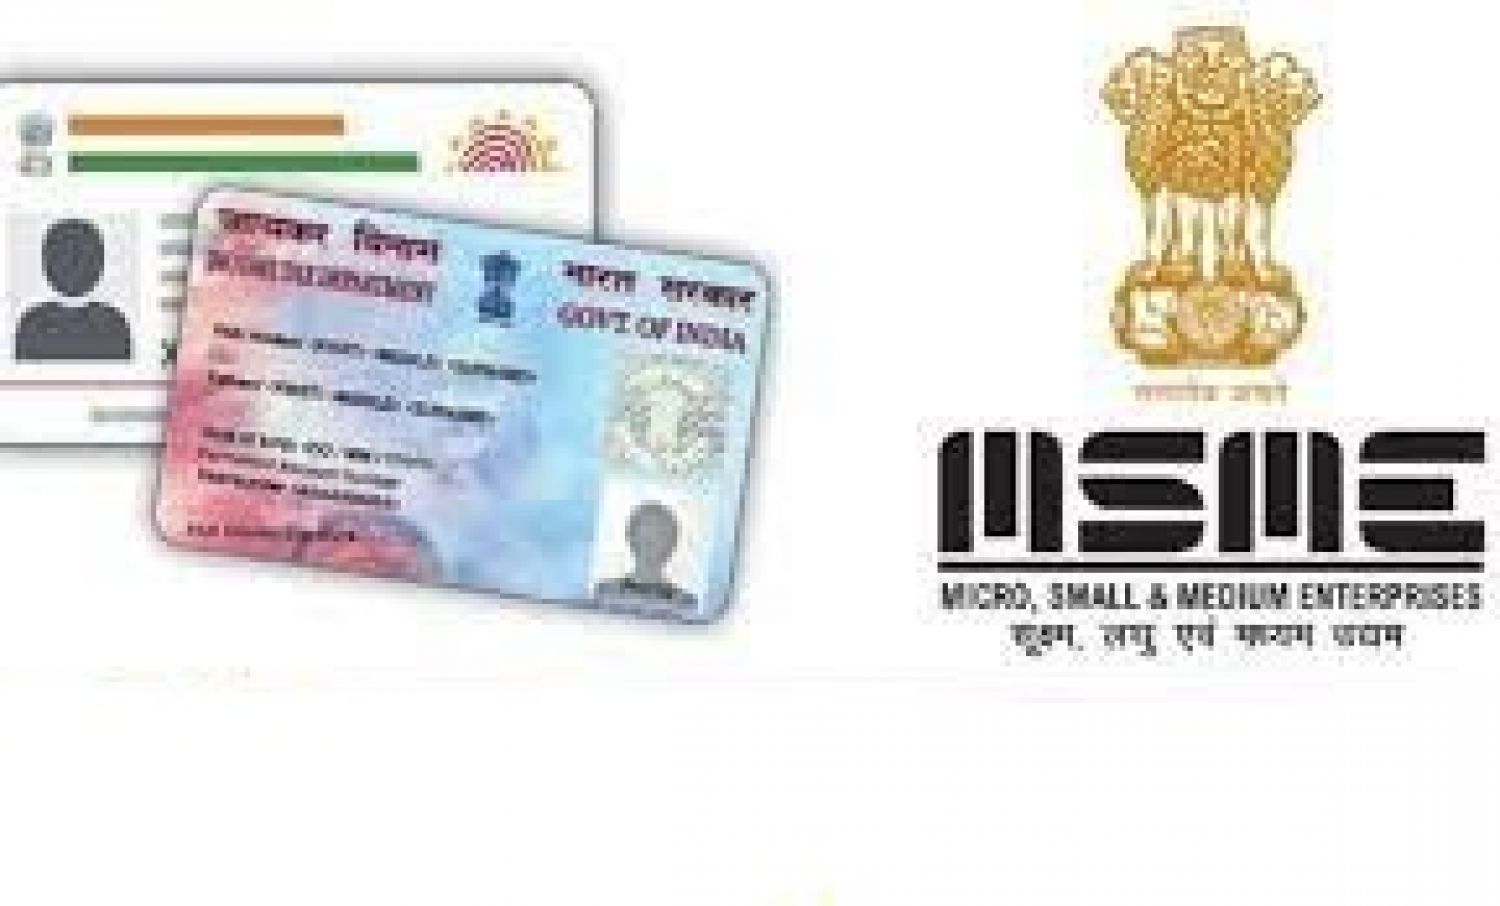 Required Only Aadhaar and PAN Card to Complete MSMEs Registration